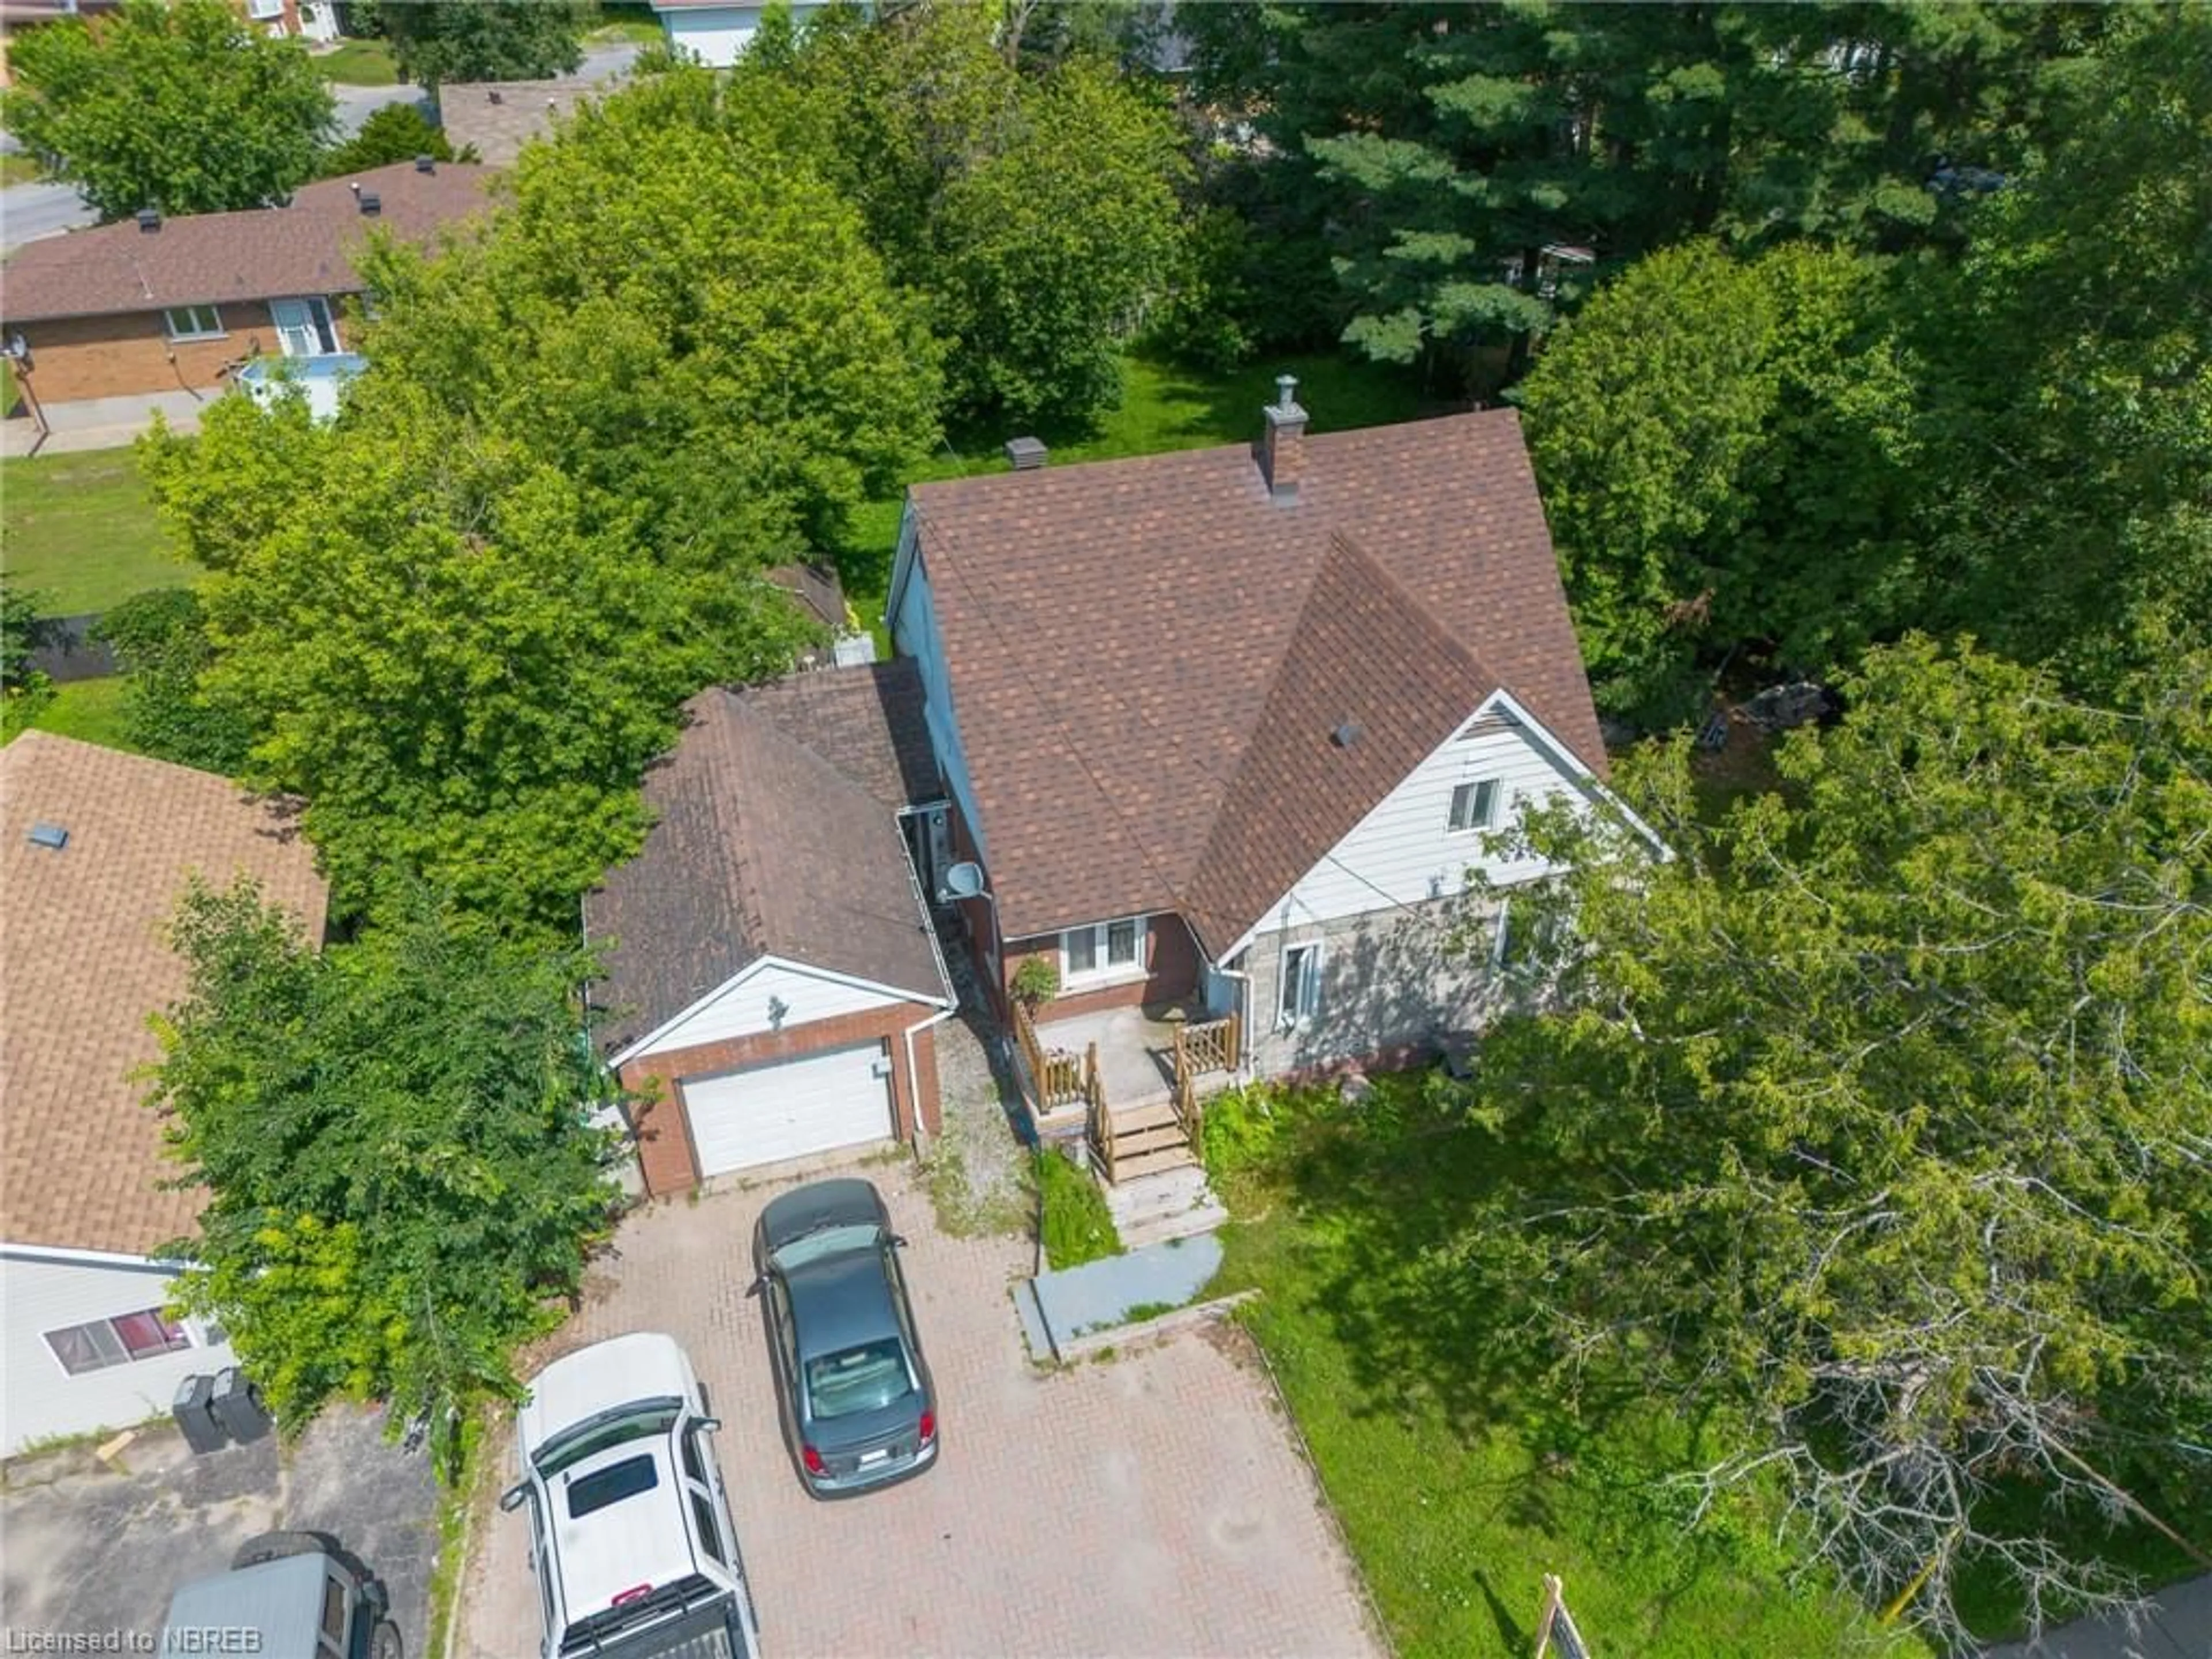 Frontside or backside of a home for 2334 Trout Lake Rd, North Bay Ontario P1B 7S6